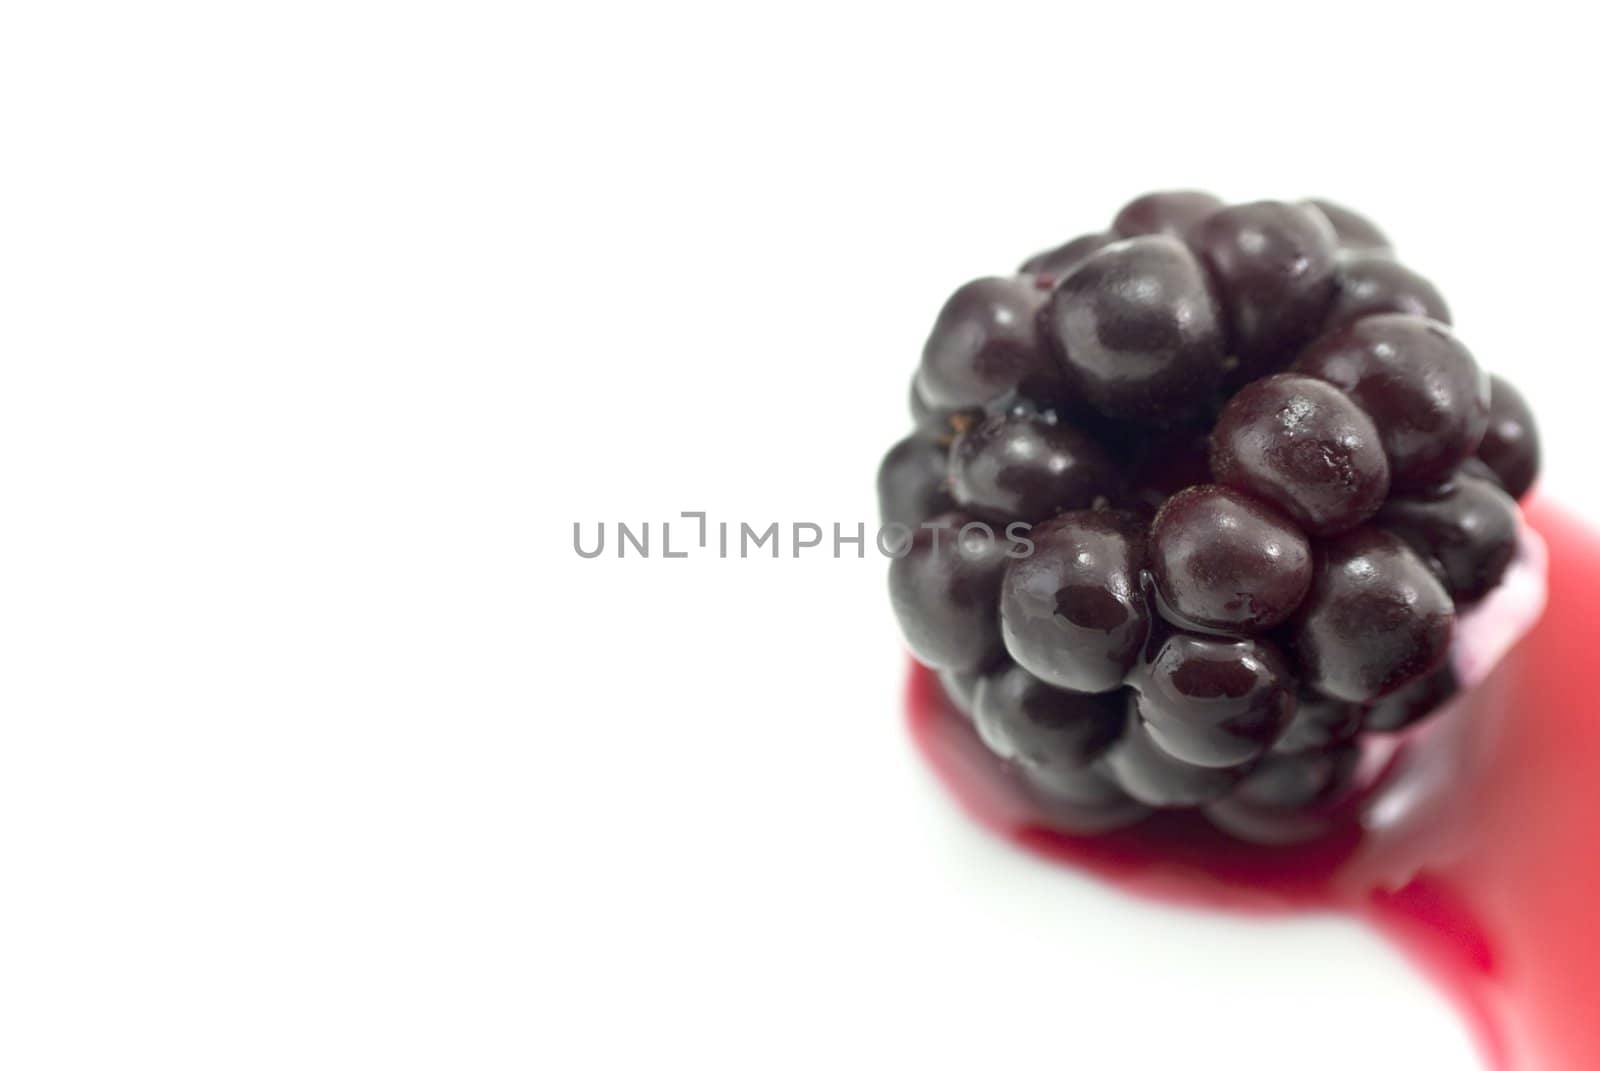 A solitary blackberry on right side of frame with a dab of cream, resting in berry juice which spills out of frame to the lower right.  Isolated on white.  Copy space to the left.